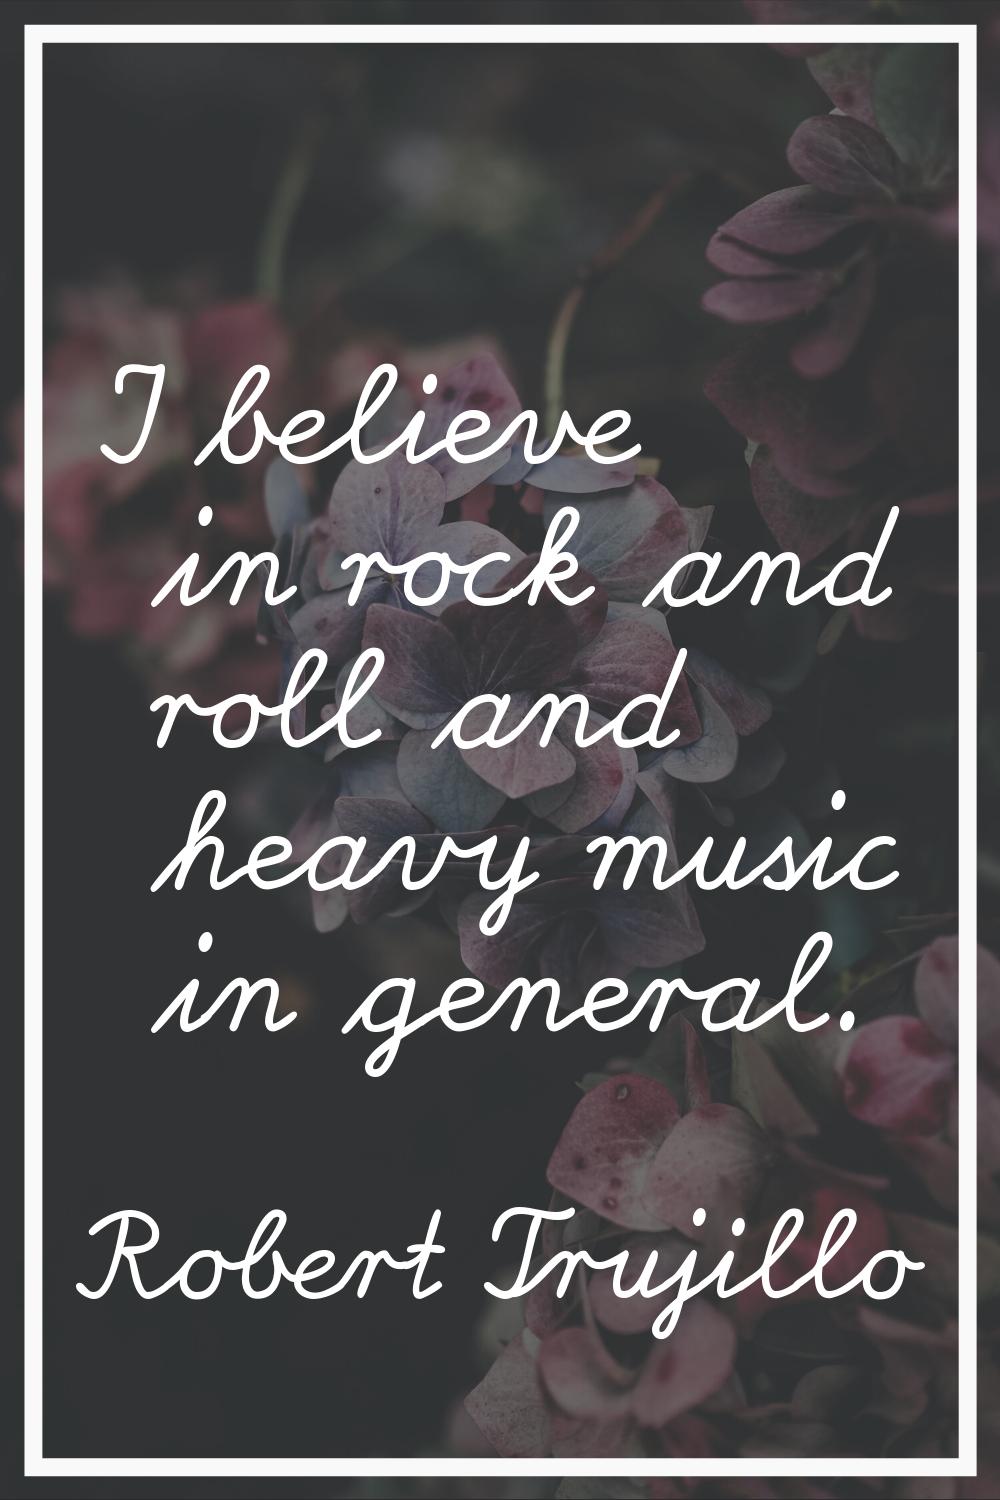 I believe in rock and roll and heavy music in general.